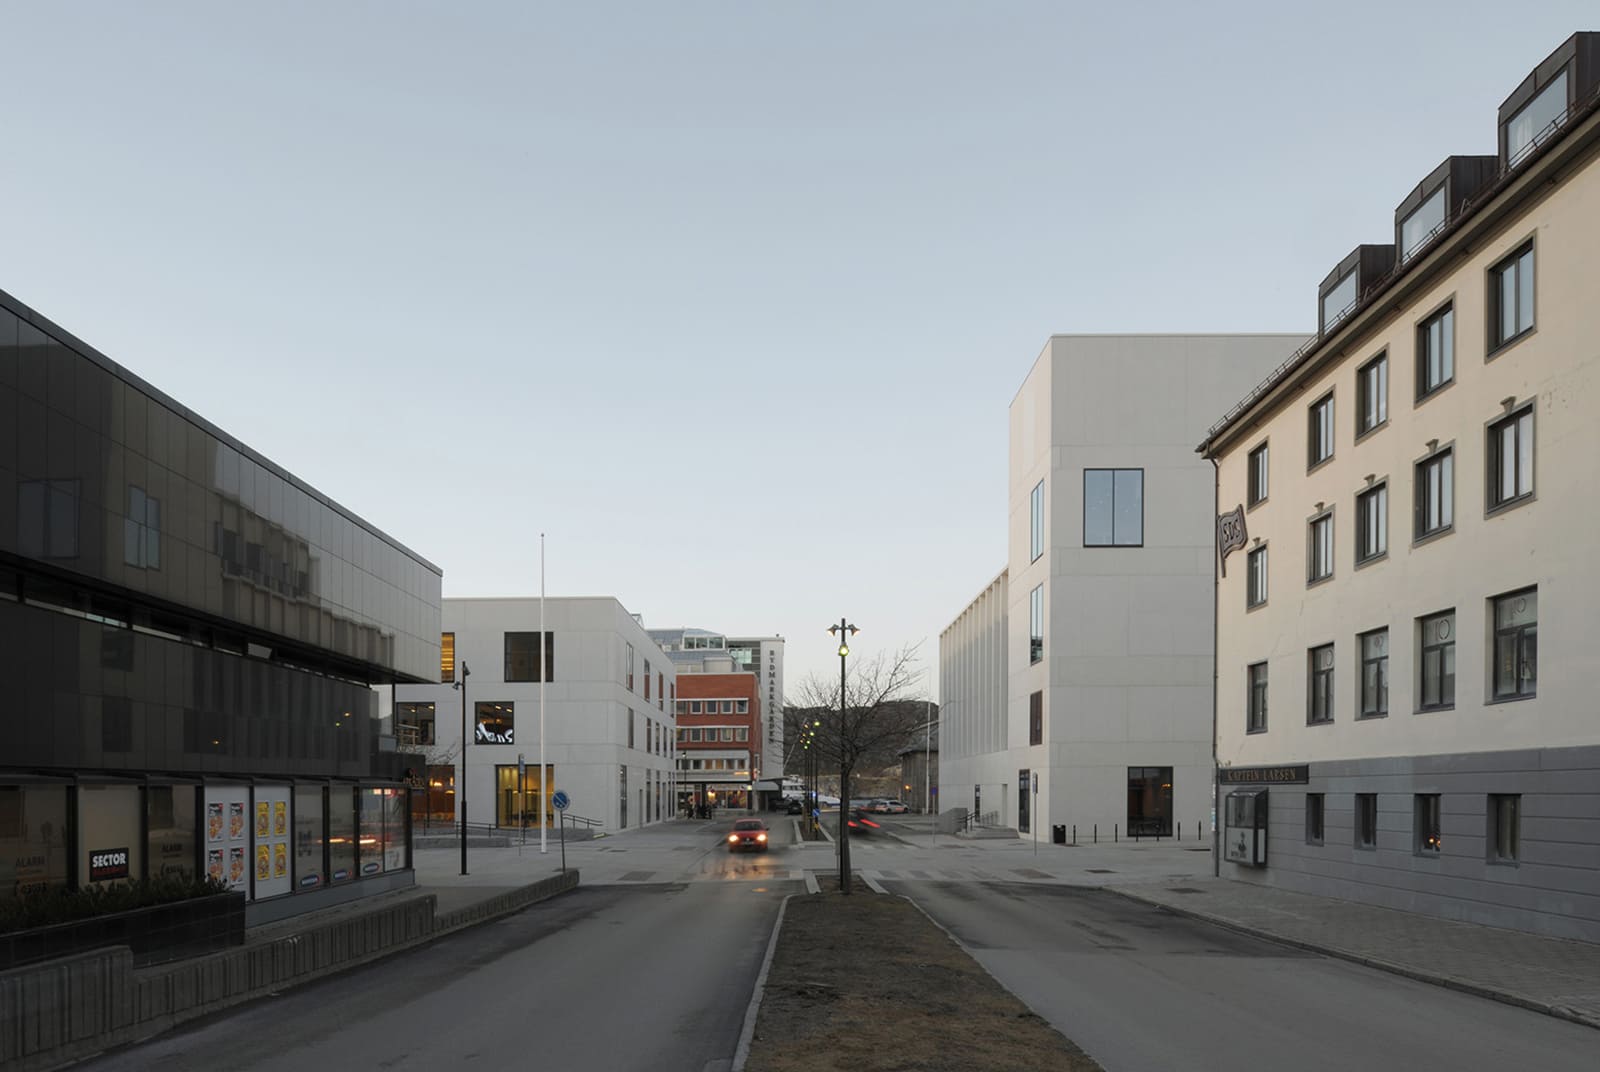 Stormen – Library and Concert Hall in Bodø